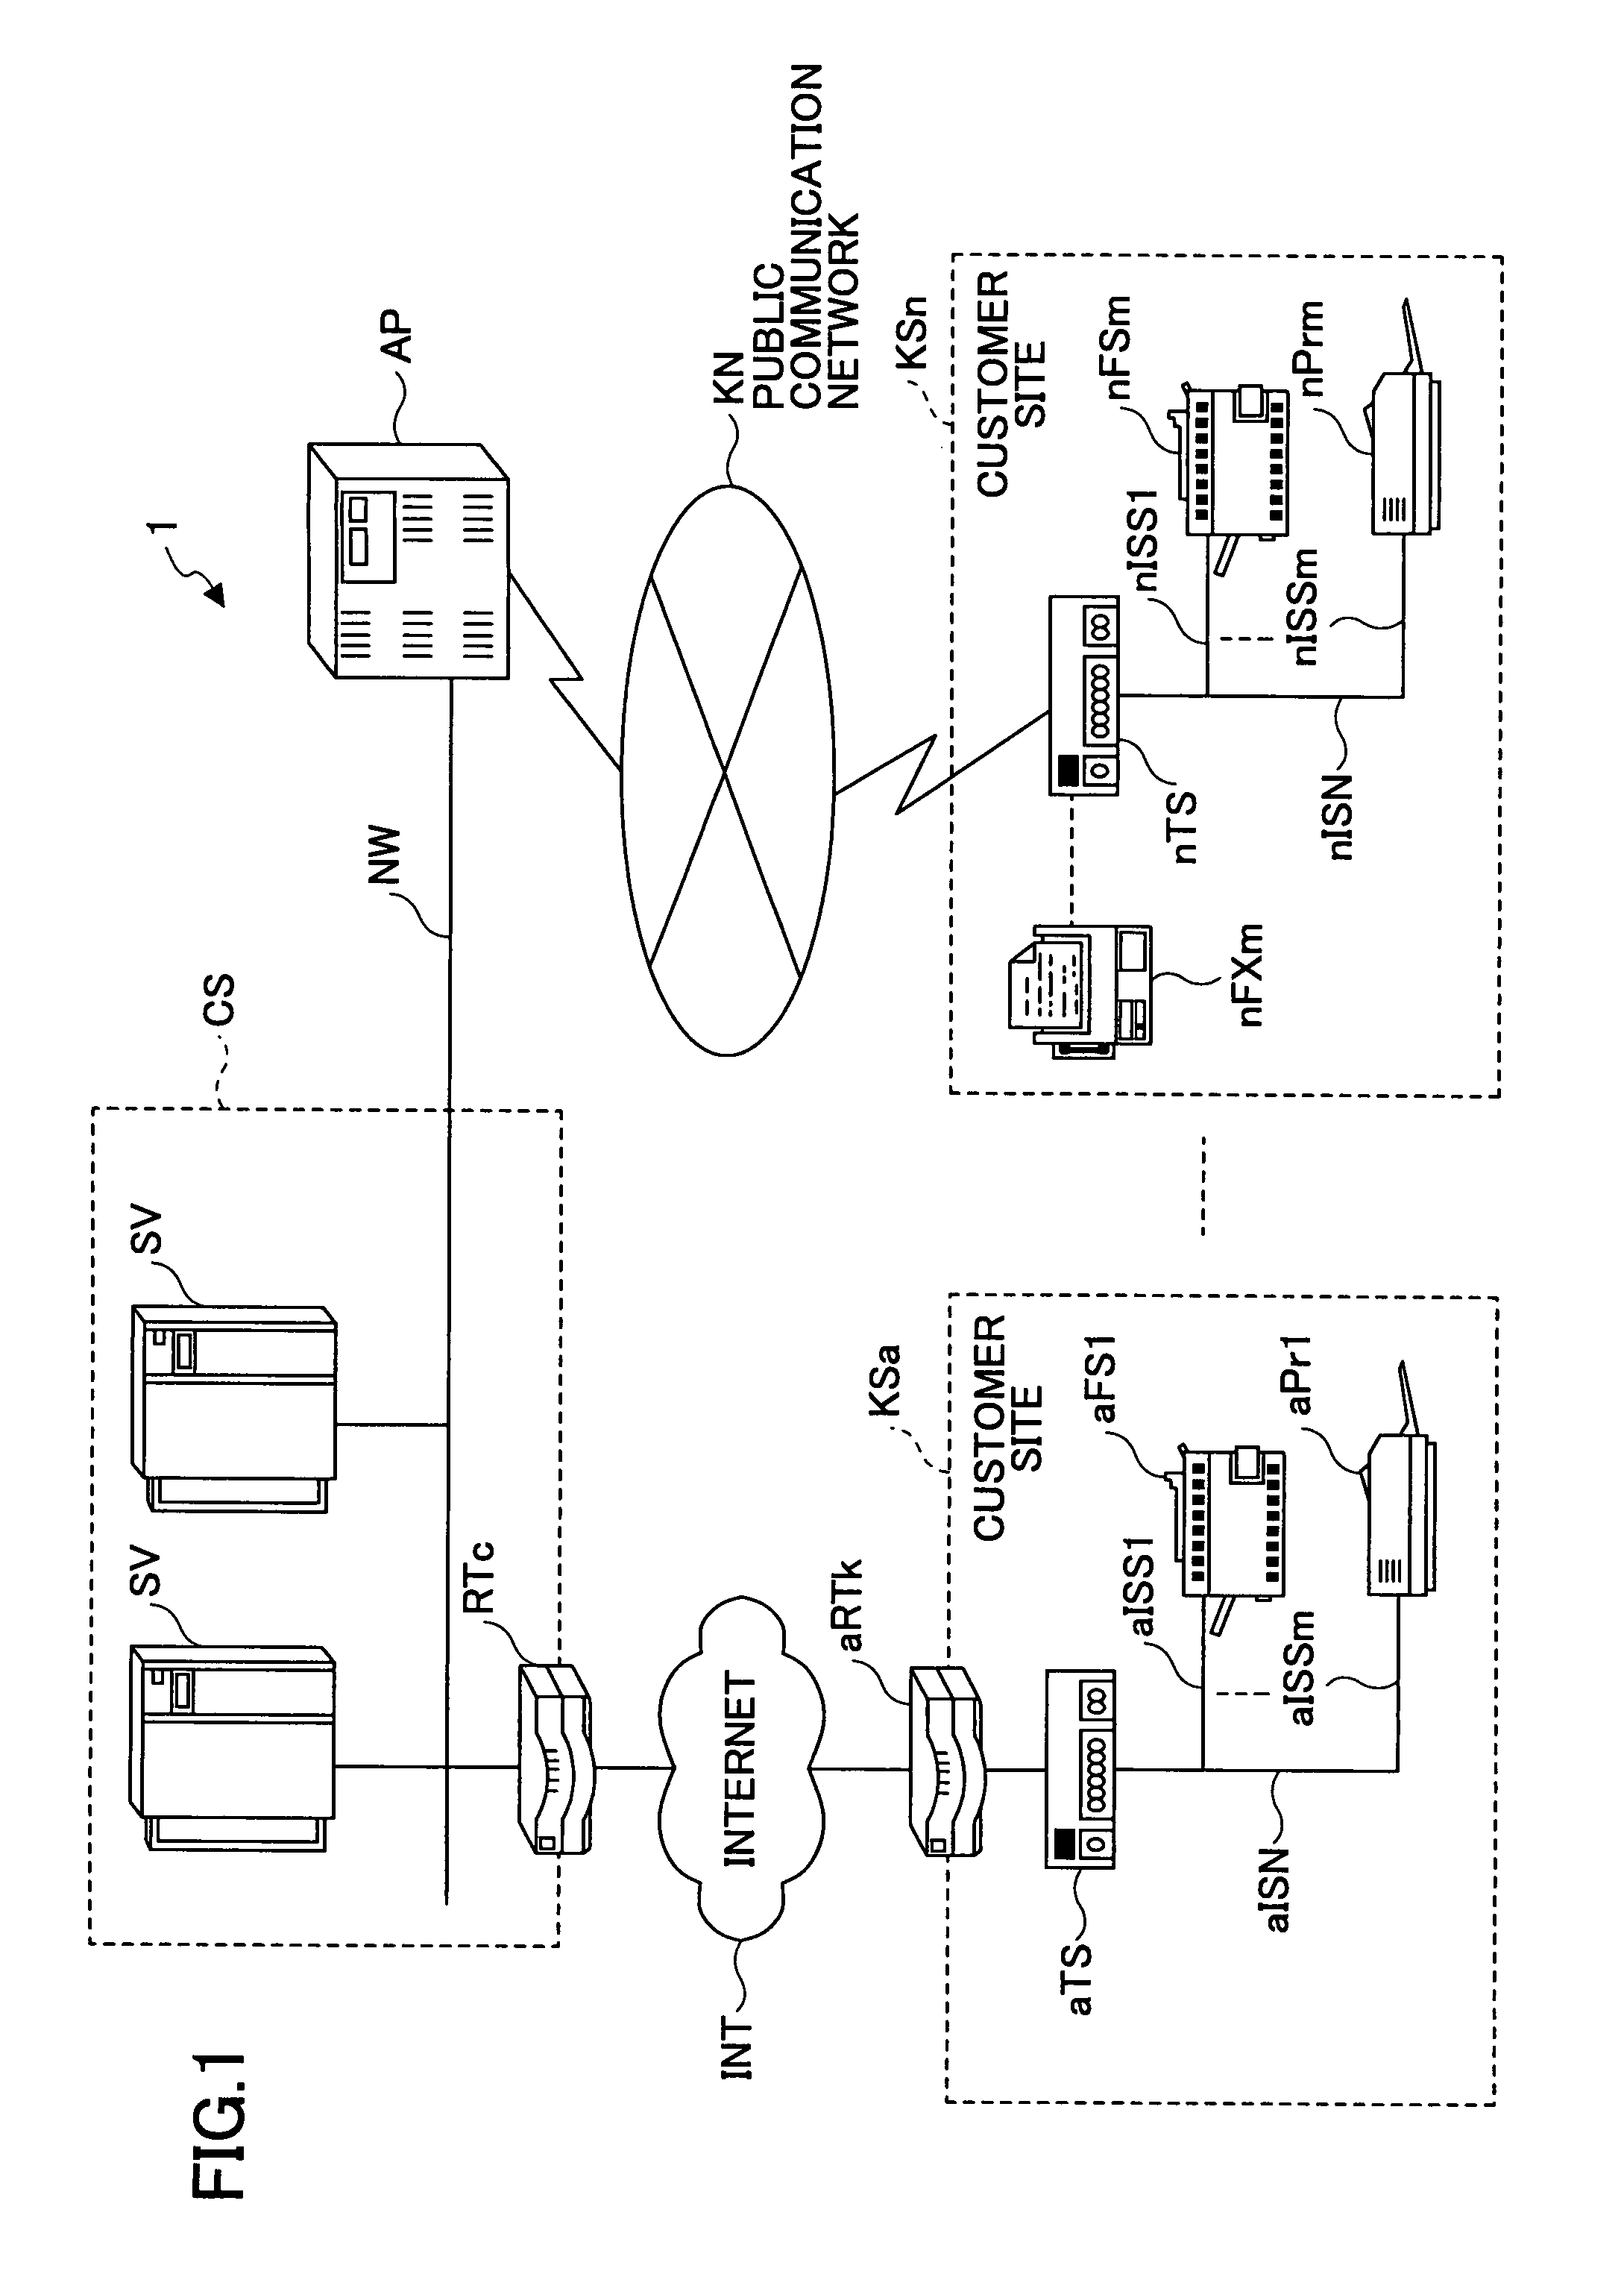 Communication device and remote management system